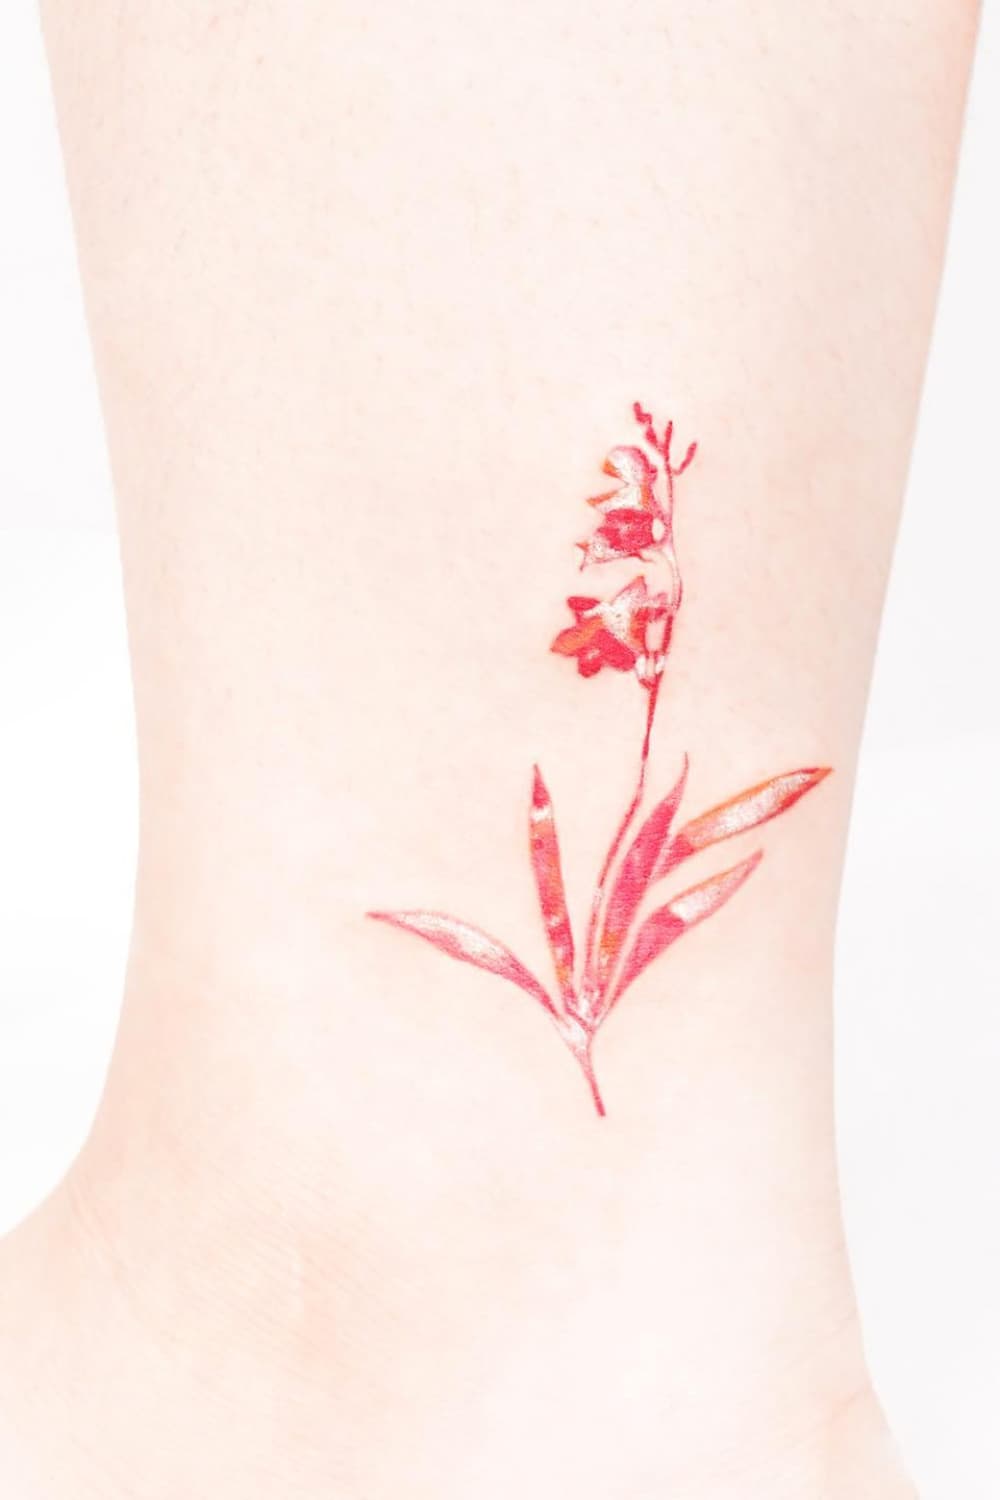 Colorful Flower Silhouette Tattoo